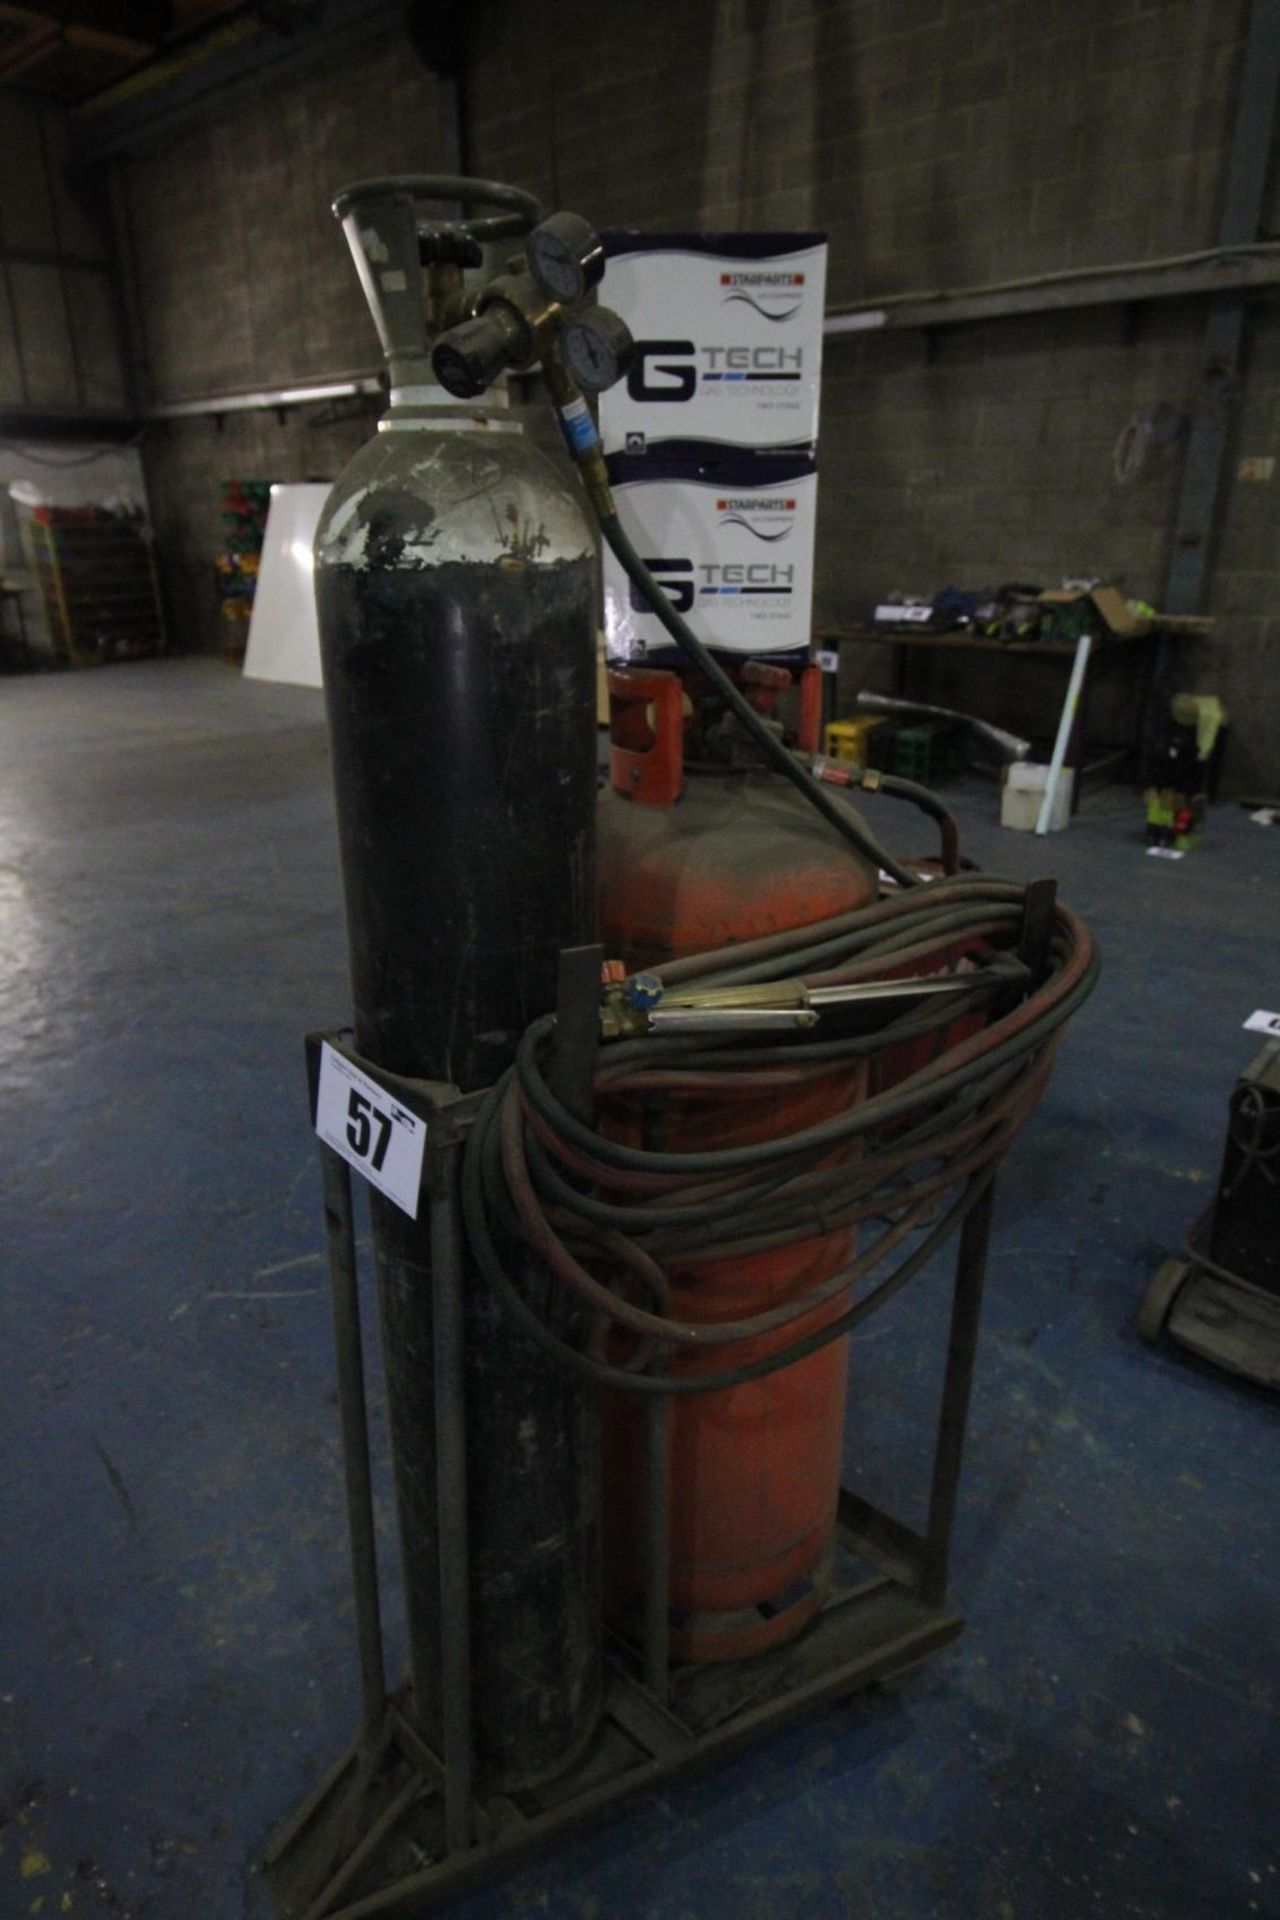 TWIN GAS BOTTLE TROLLEY, 2x REGULATORS, LENGTH OF HOSE, BURNING TORCH, 2x BOXED G-TECH, 2-STAGE